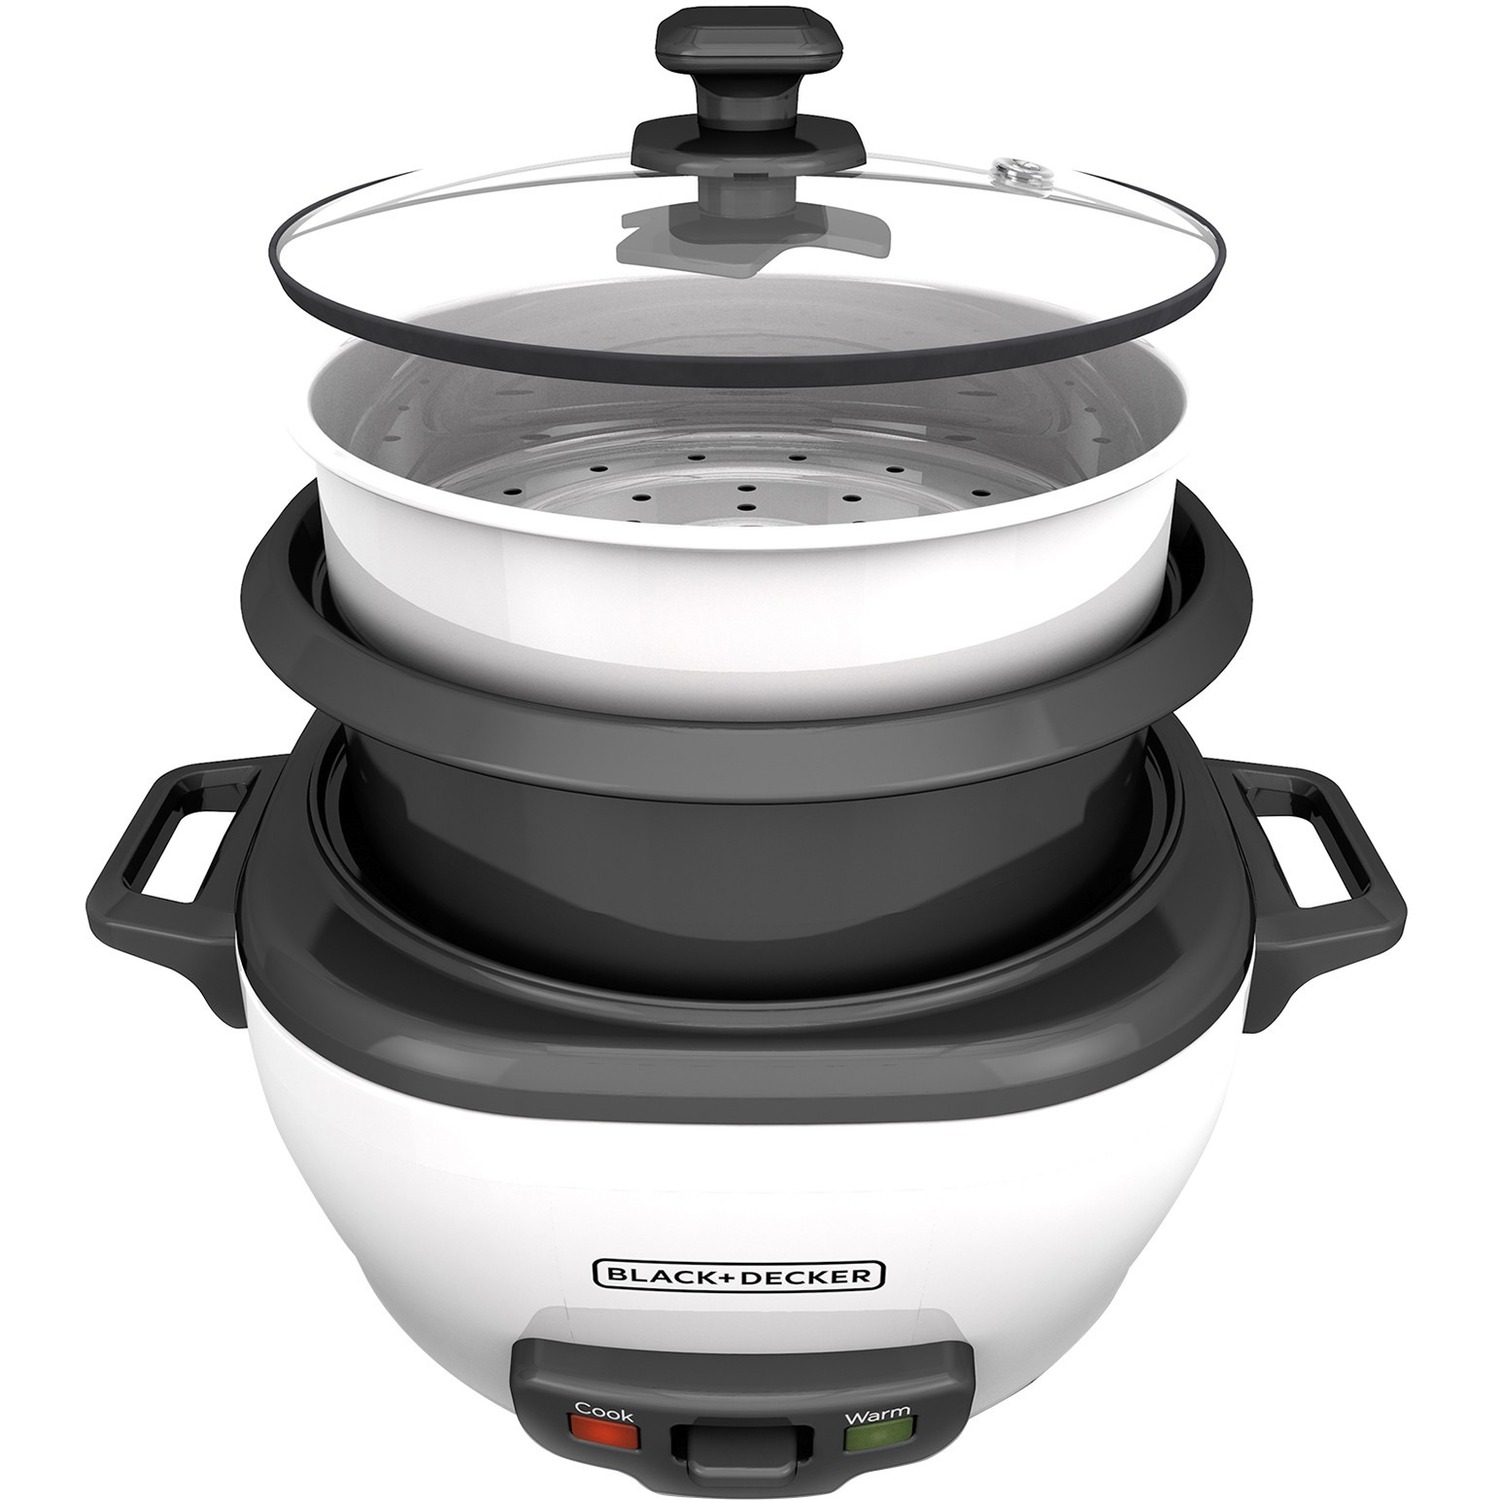 BLACK+DECKER 3-Cup Electric Rice Cooker with Keep-Warm Function, White, RC503 - image 2 of 7